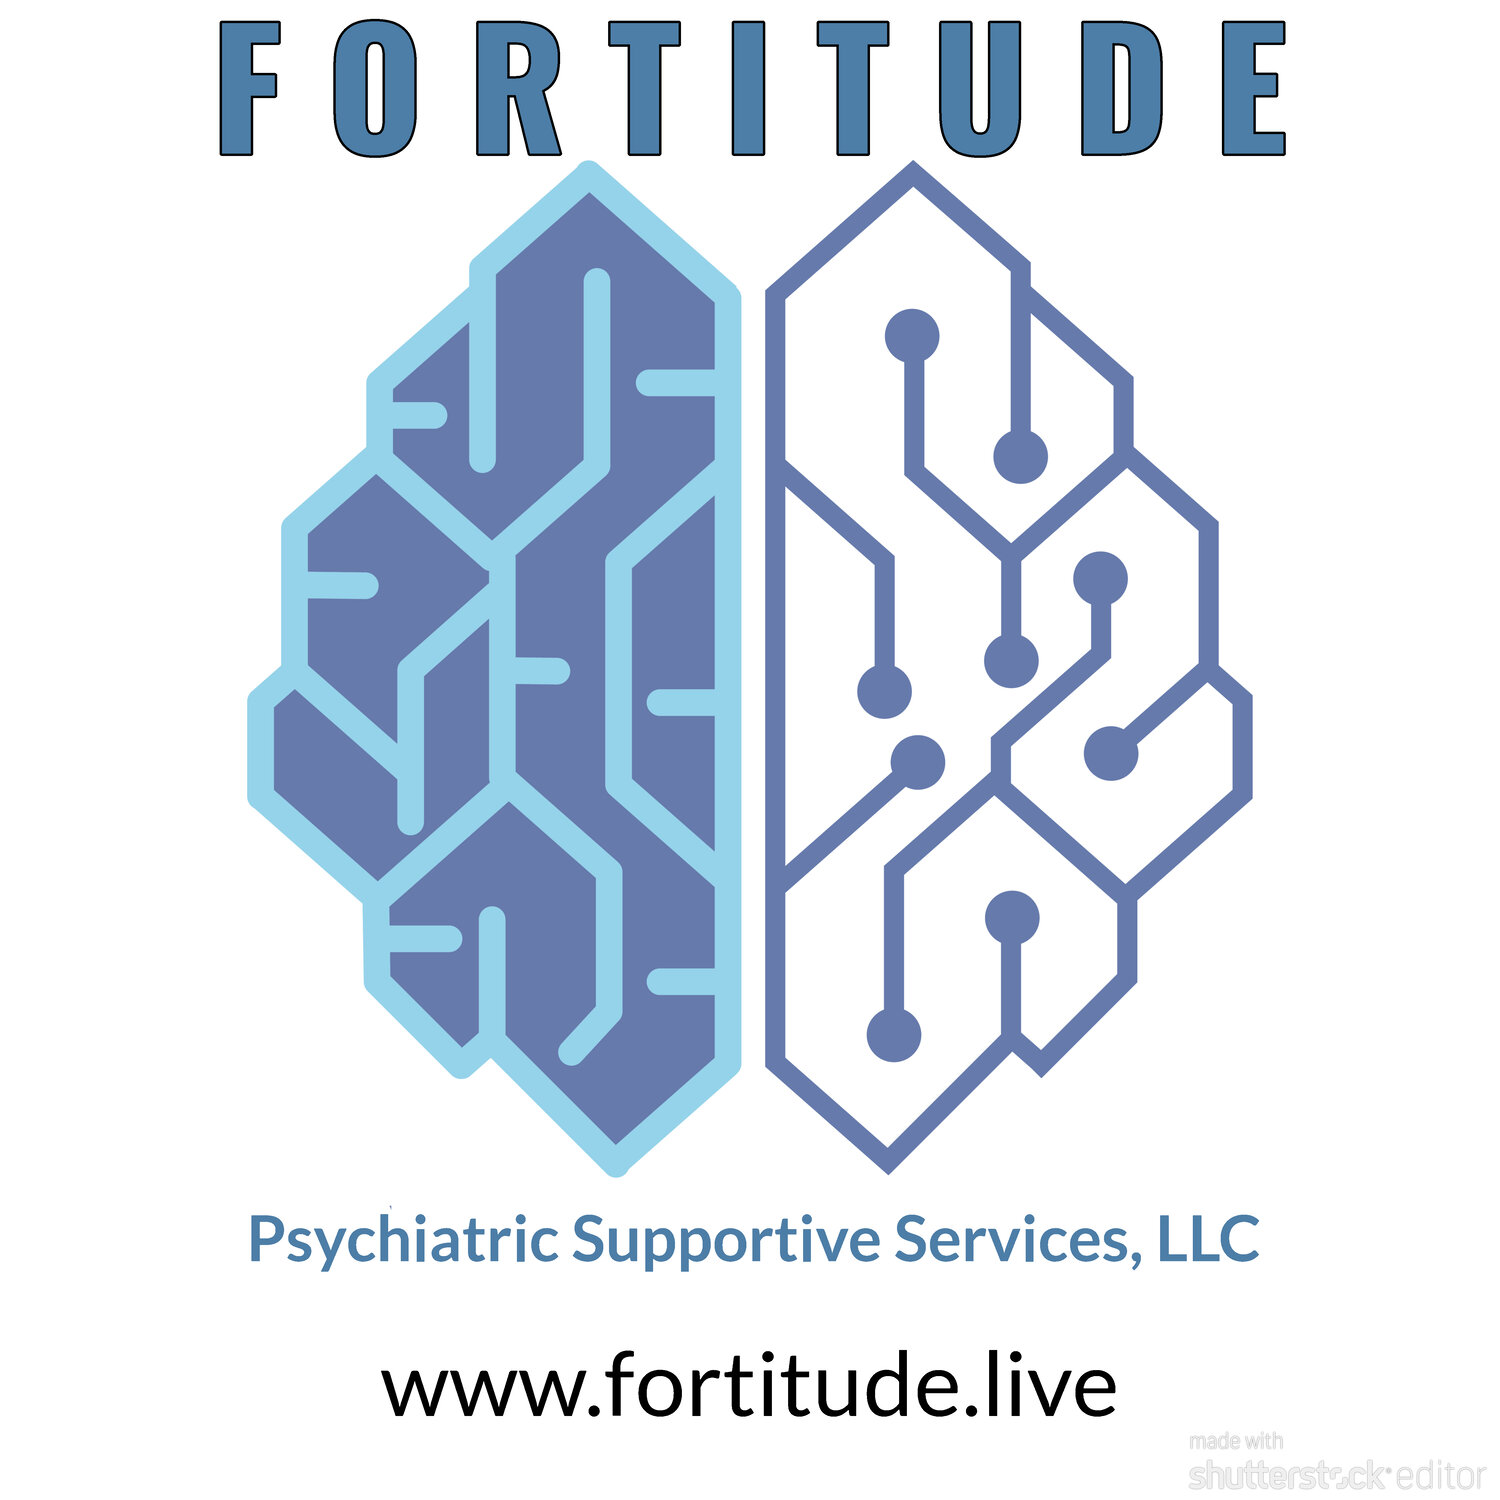 FORTITUDE  Psychiatric Supportive Services, LLC